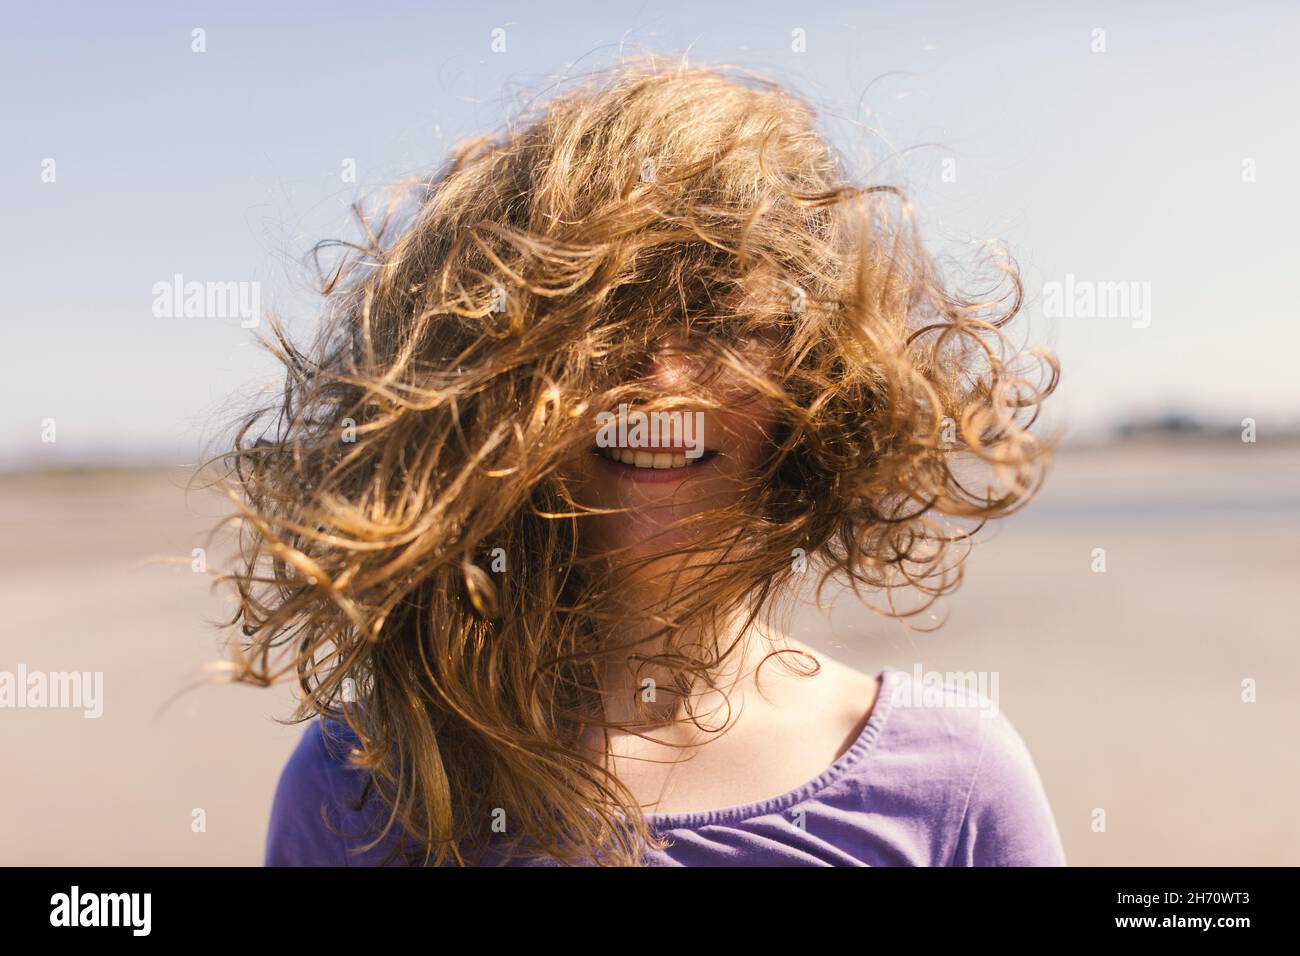 Portrait of teenage girl with messy hair Stock Photo